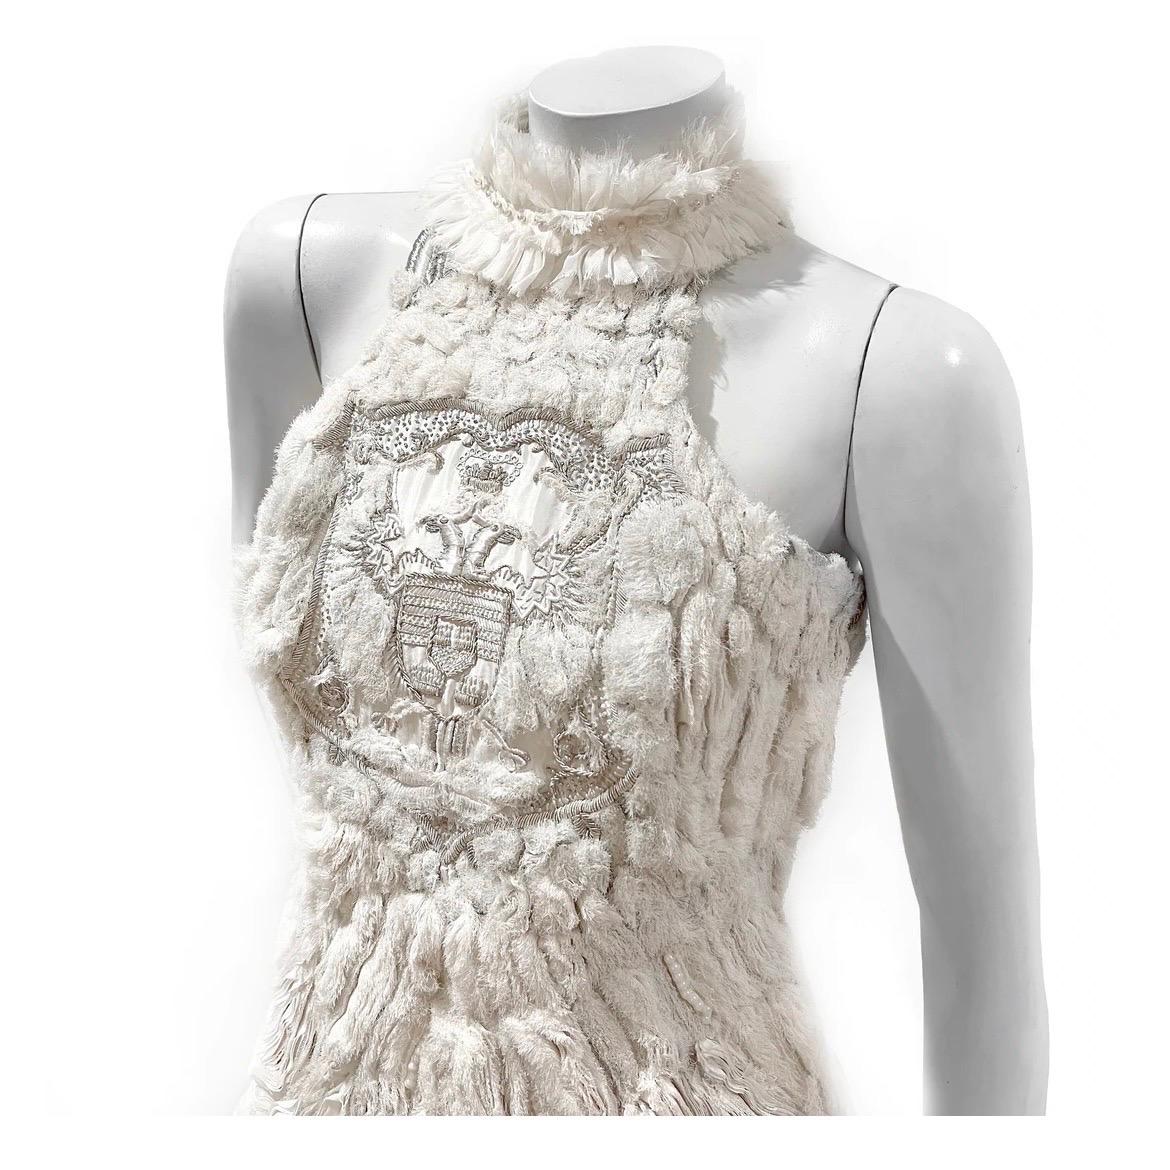 Ornate halter dress by Sarah Burton for Alexander McQueen
Fall 2011 Ready-to-Wear
Look 24
Made in Italy 
White and off-white 
Internal, attached corset
Layered cotton, mesh and chiffon throughout 
Silver and gold embroidered regal detail at